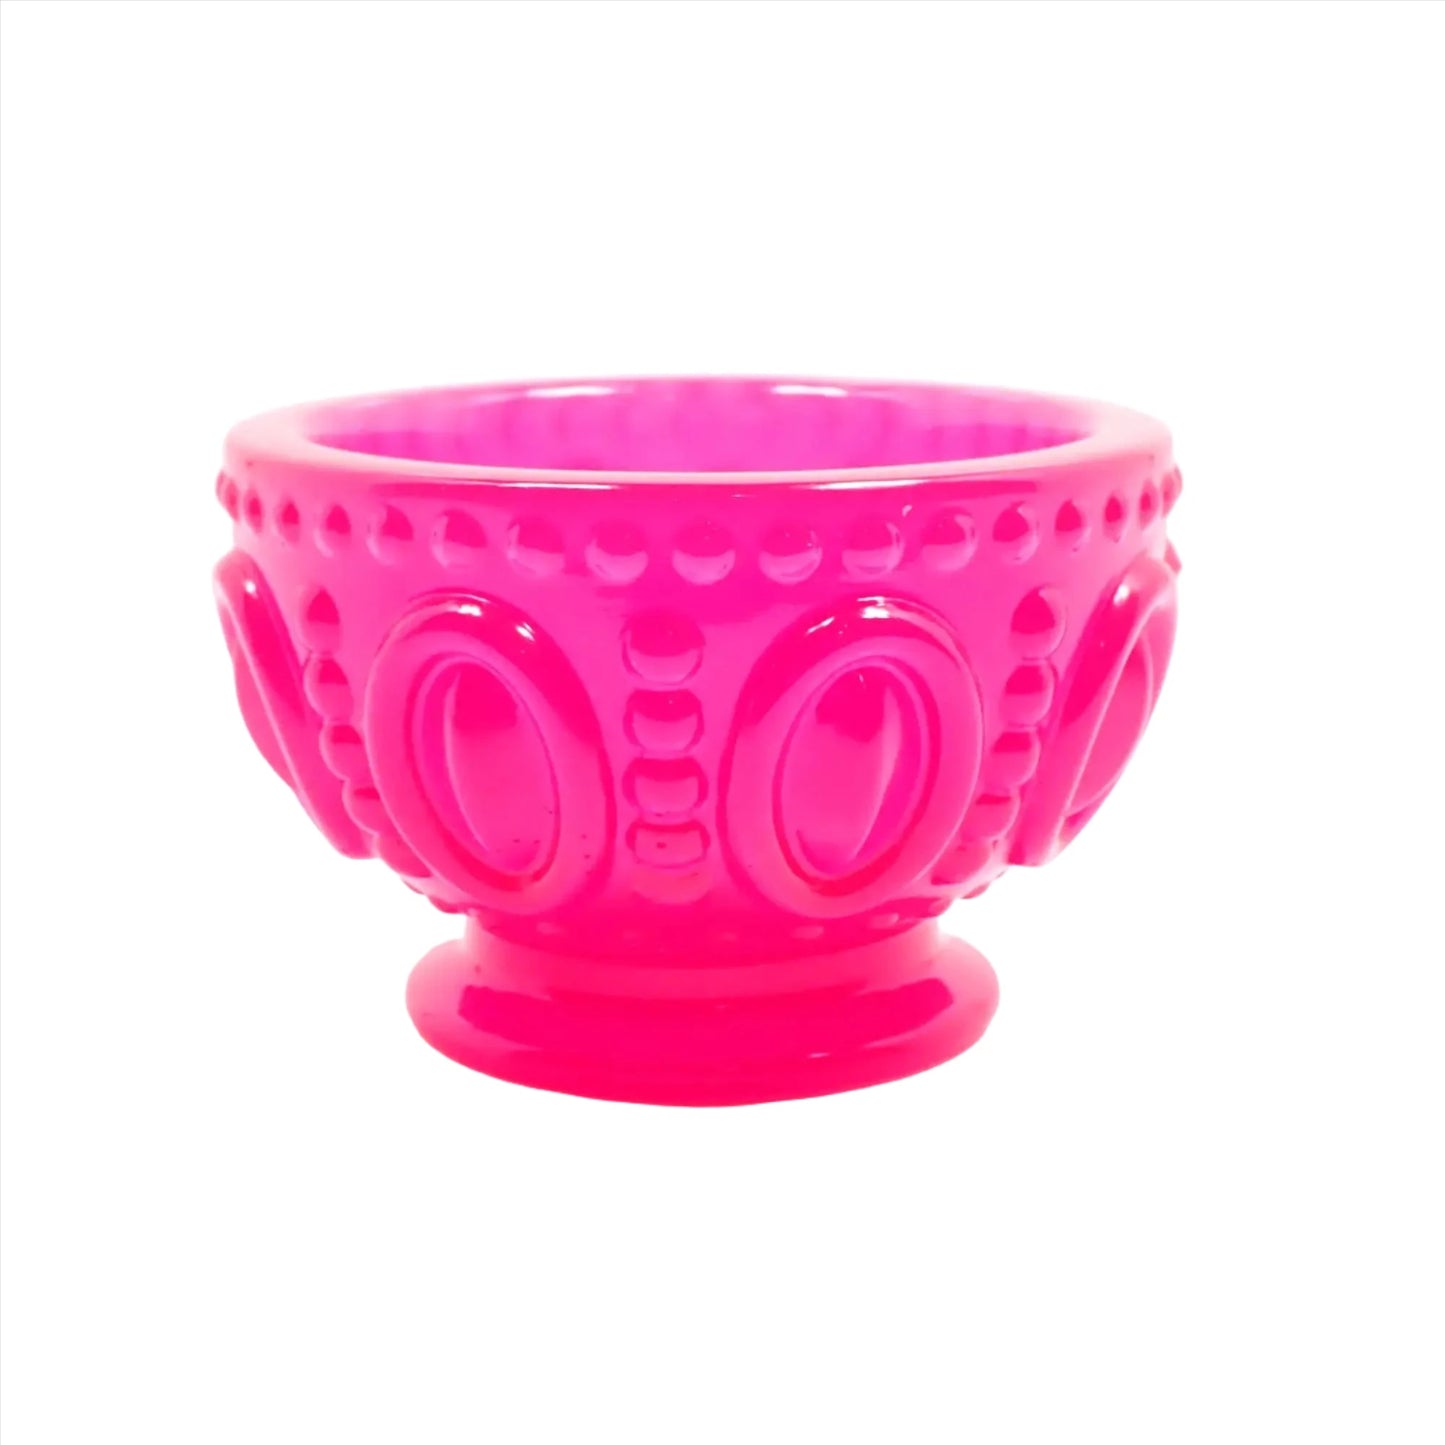 Side view of the small handmade resin decorative footed bowl. The resin is bright neon pink in color. The bowl has an oval design around the middle of it with rows of dots in between and around the top edge of the bowl. 